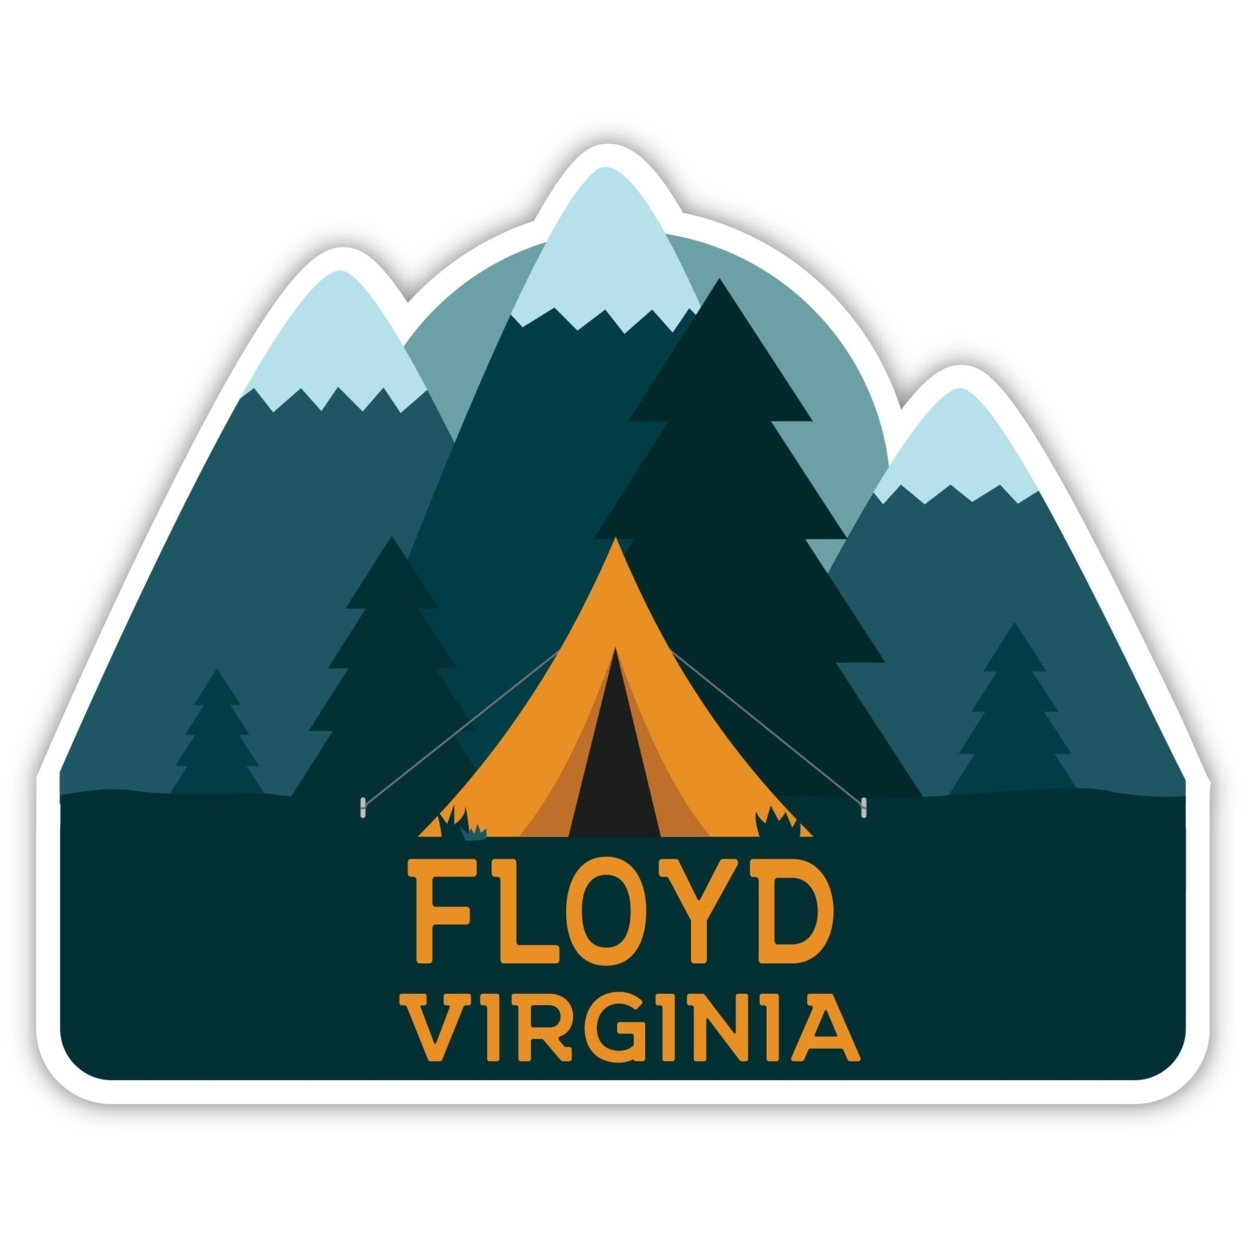 Floyd Virginia Souvenir Decorative Stickers (Choose Theme And Size) - 4-Pack, 8-Inch, Tent